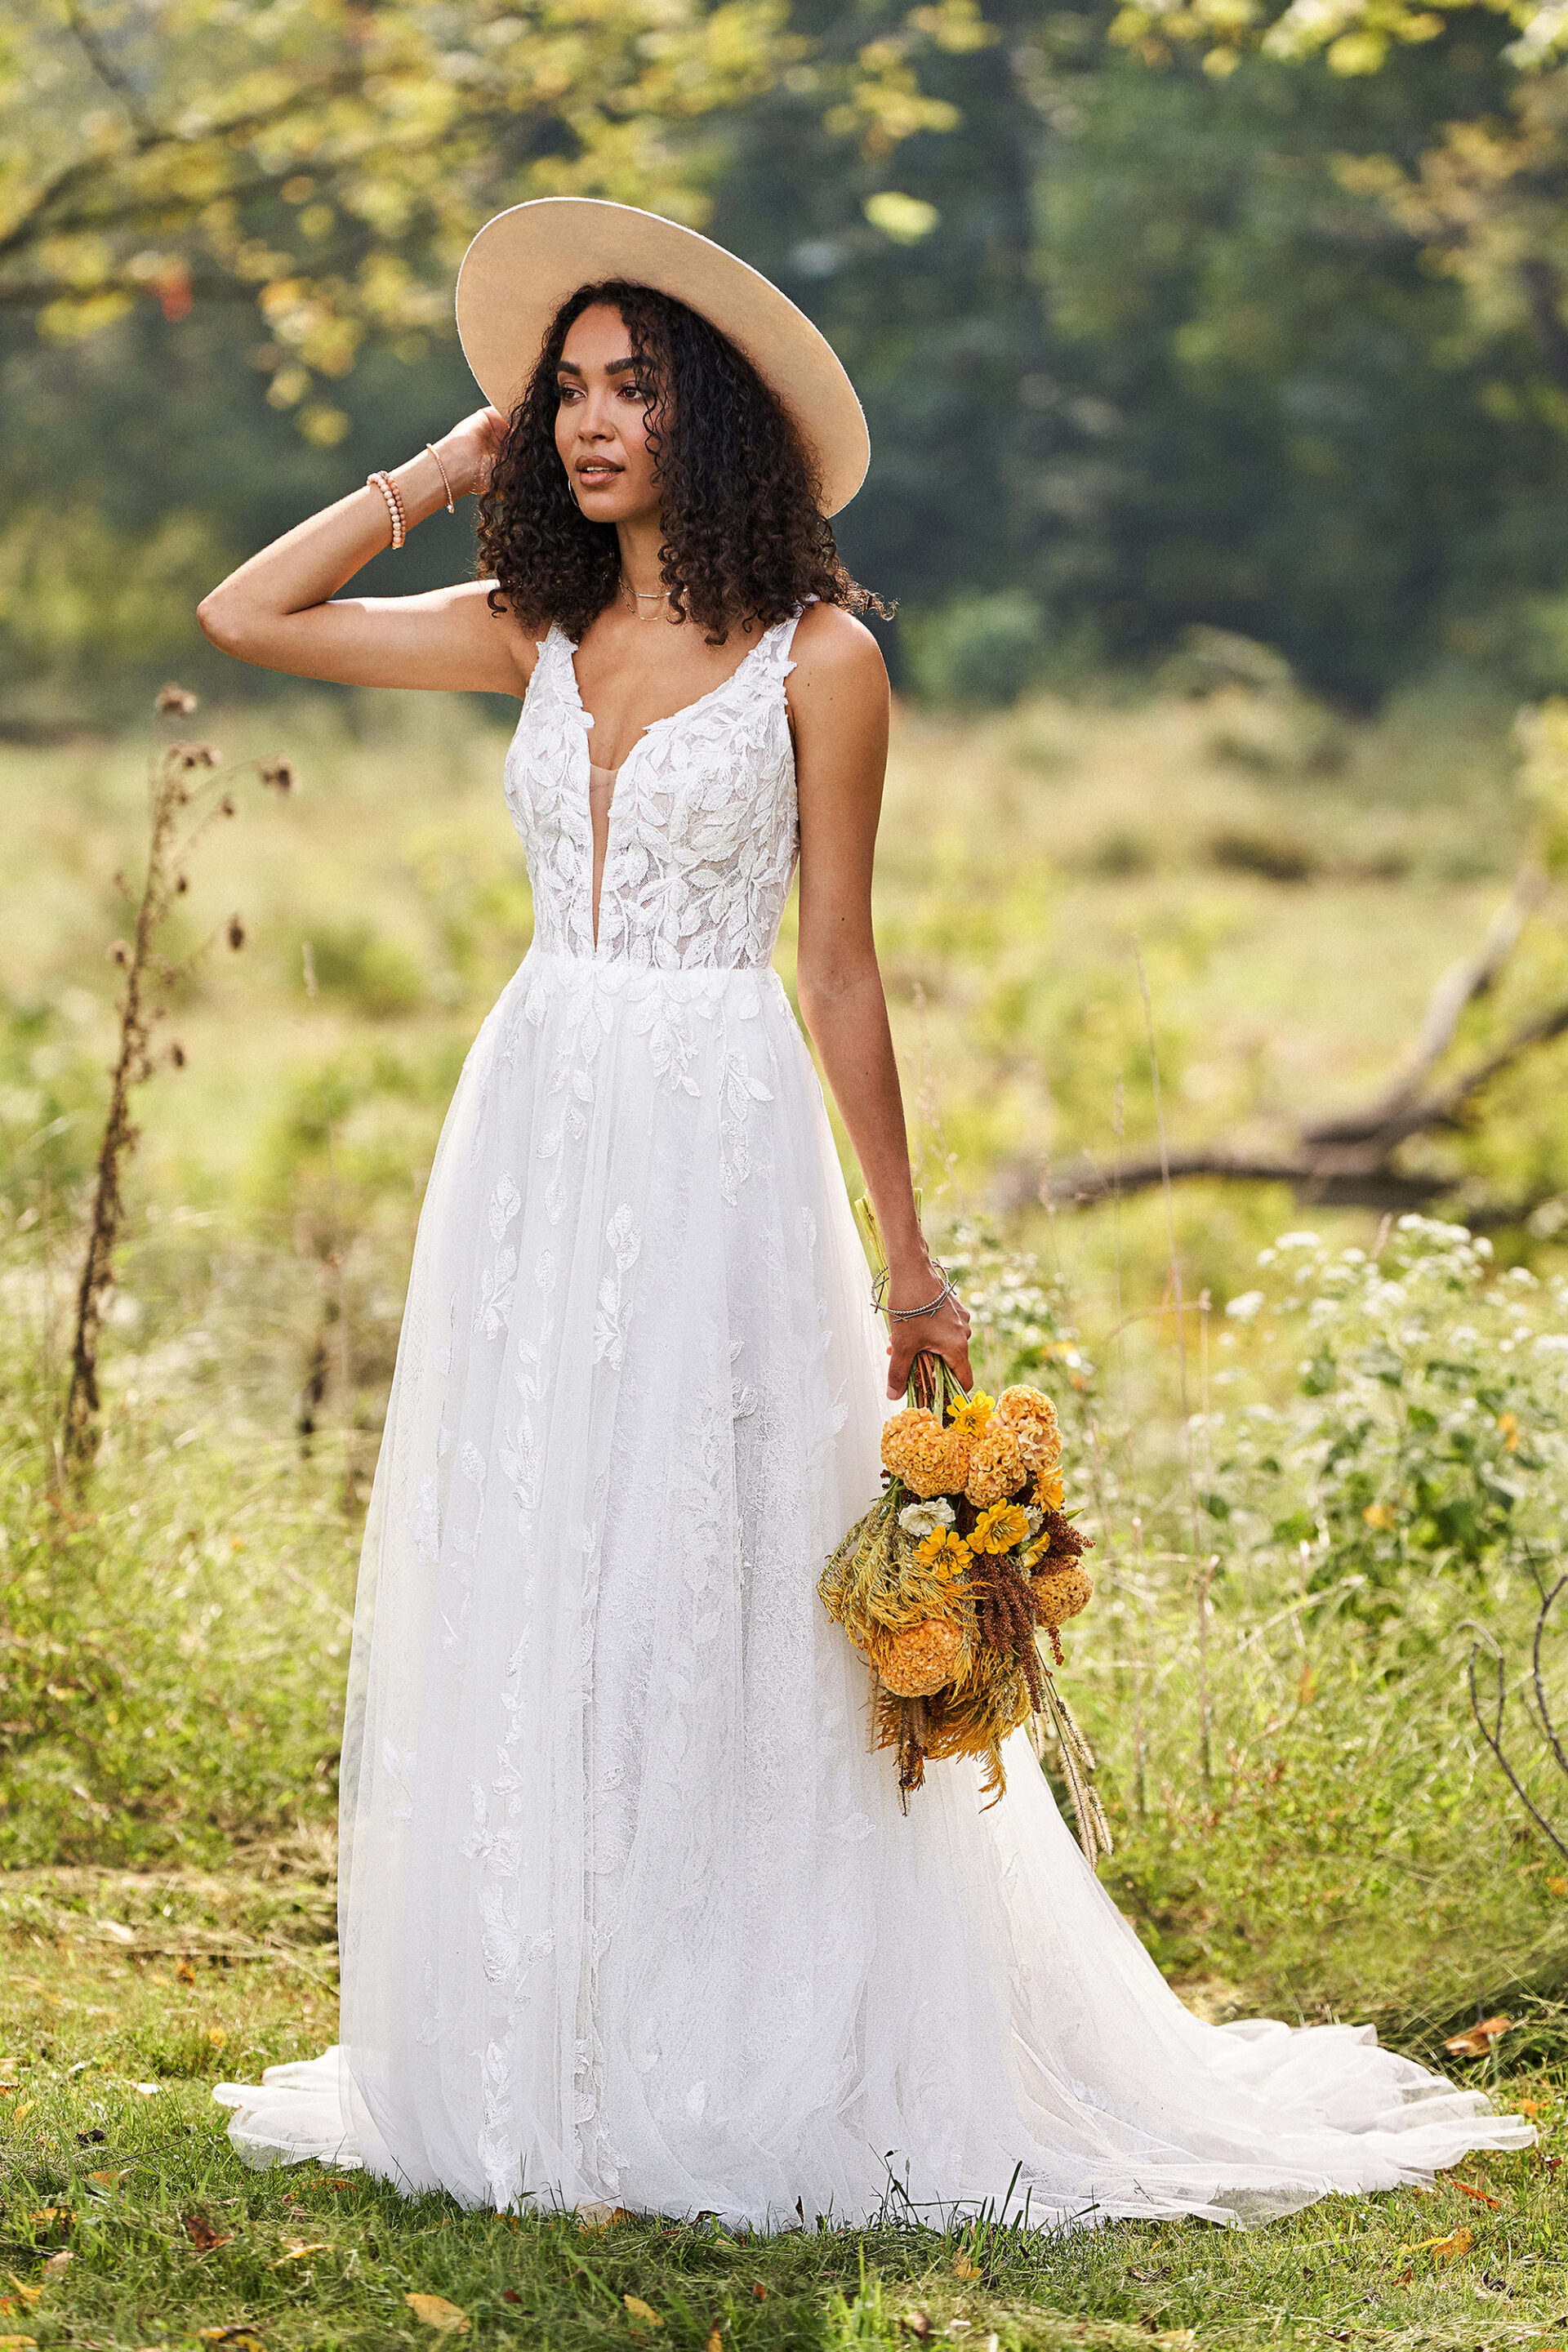 V-Neck Tulle A-Line Bridal Dress with Sequined Lace at K&B Bridals in Maryland